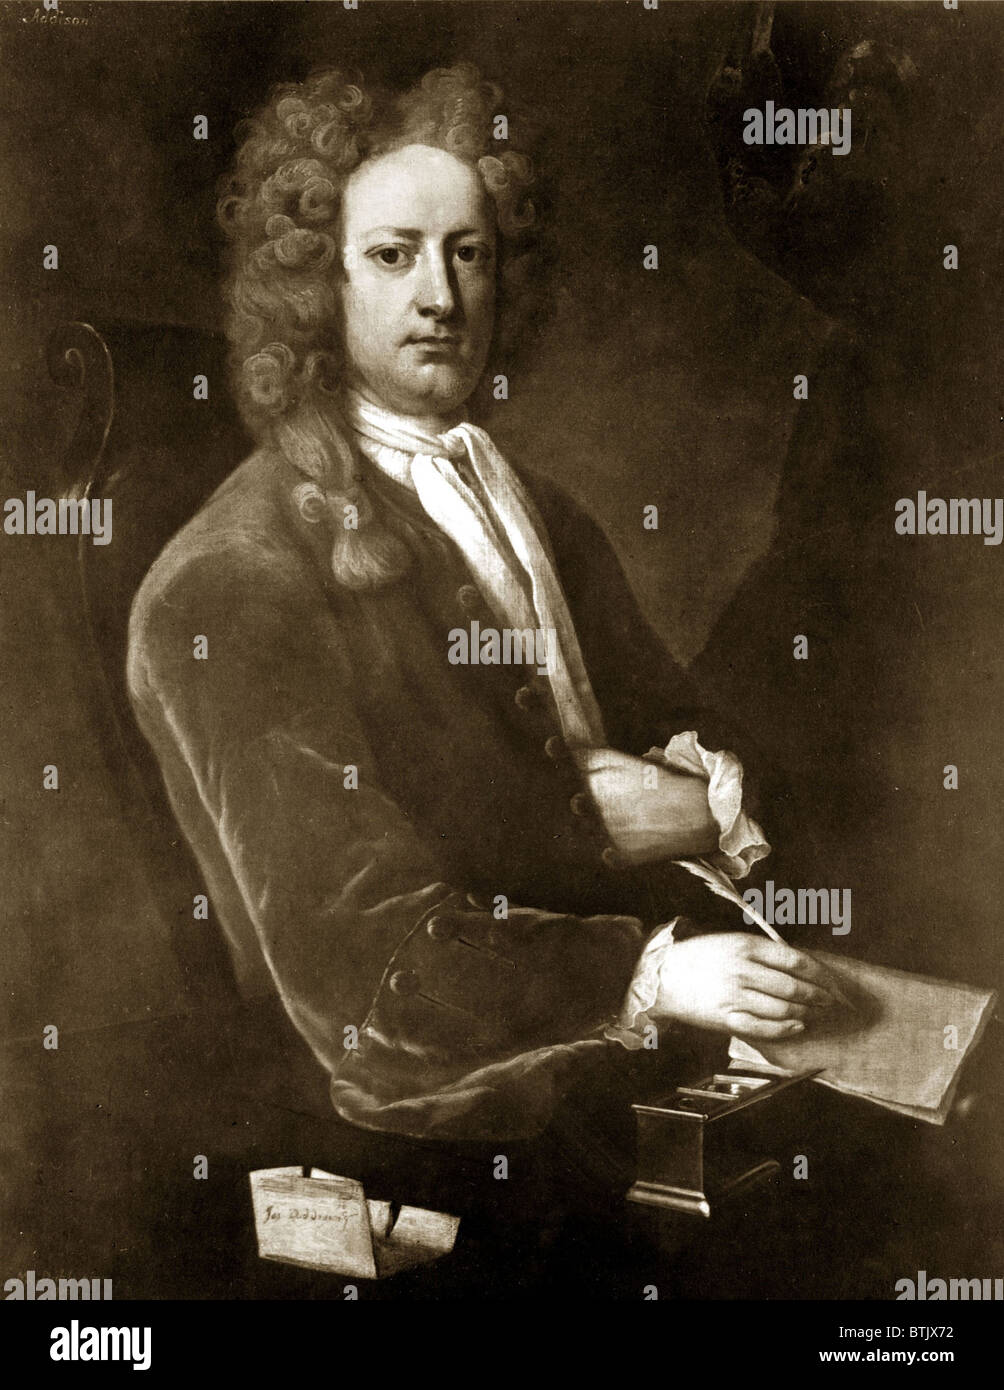 Joseph Addison (1672-1719), intertwined his political and literary careers, accepting commissions to create poetry celebrating royalty and British history, and holding a seat in the House of Commons. Stock Photo